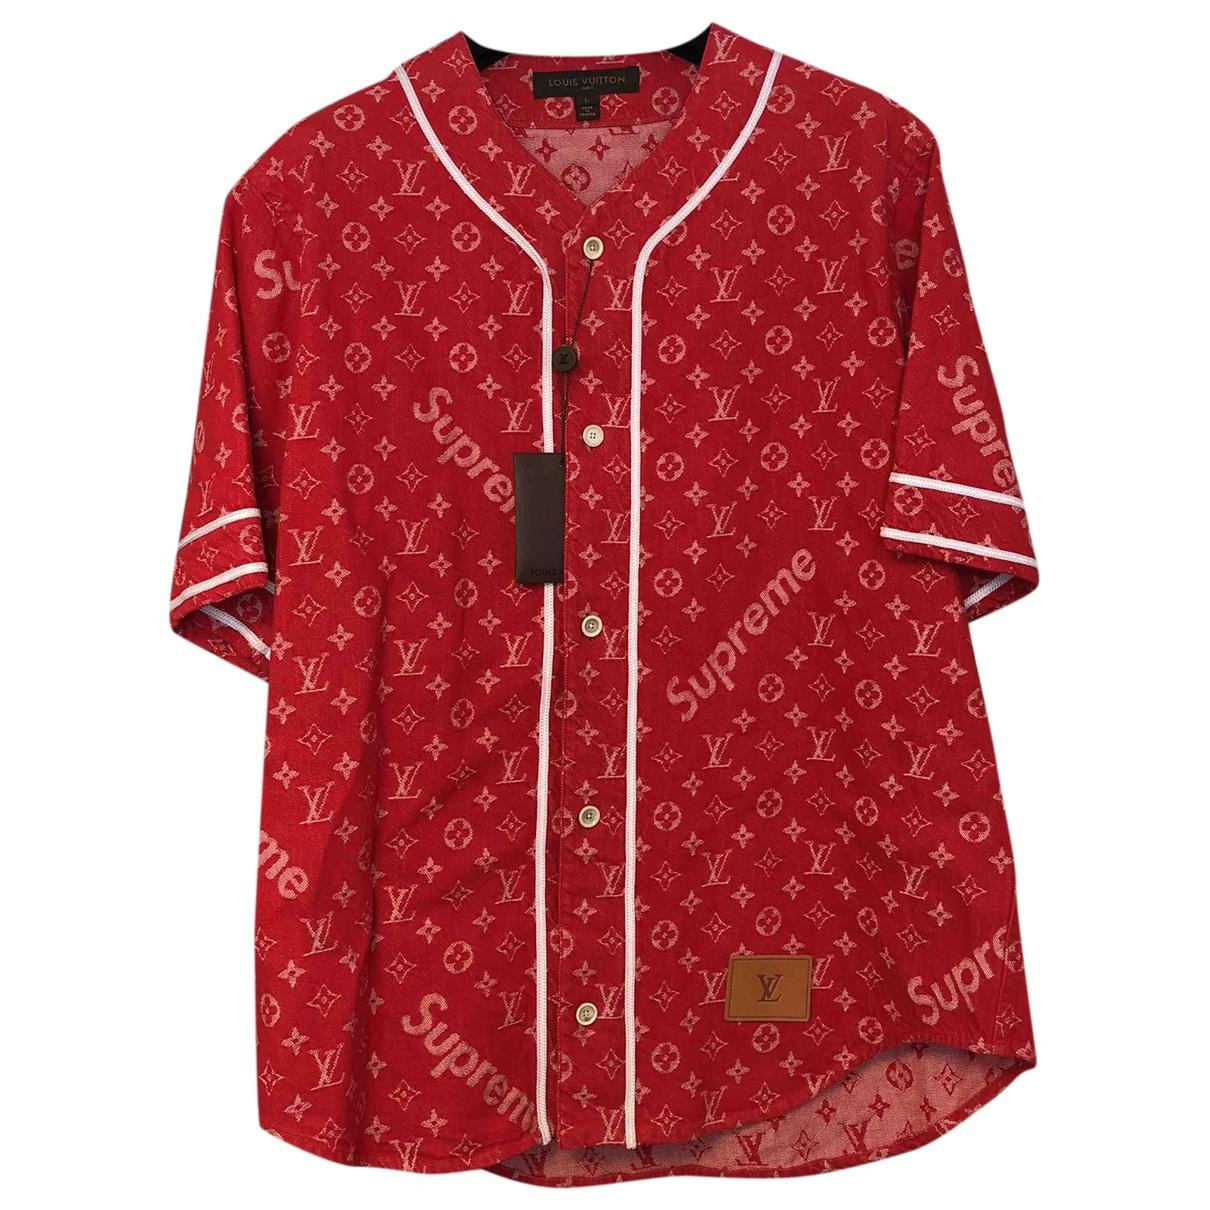 Shirt Louis Vuitton x Supreme Red size L International in Other - 5458587